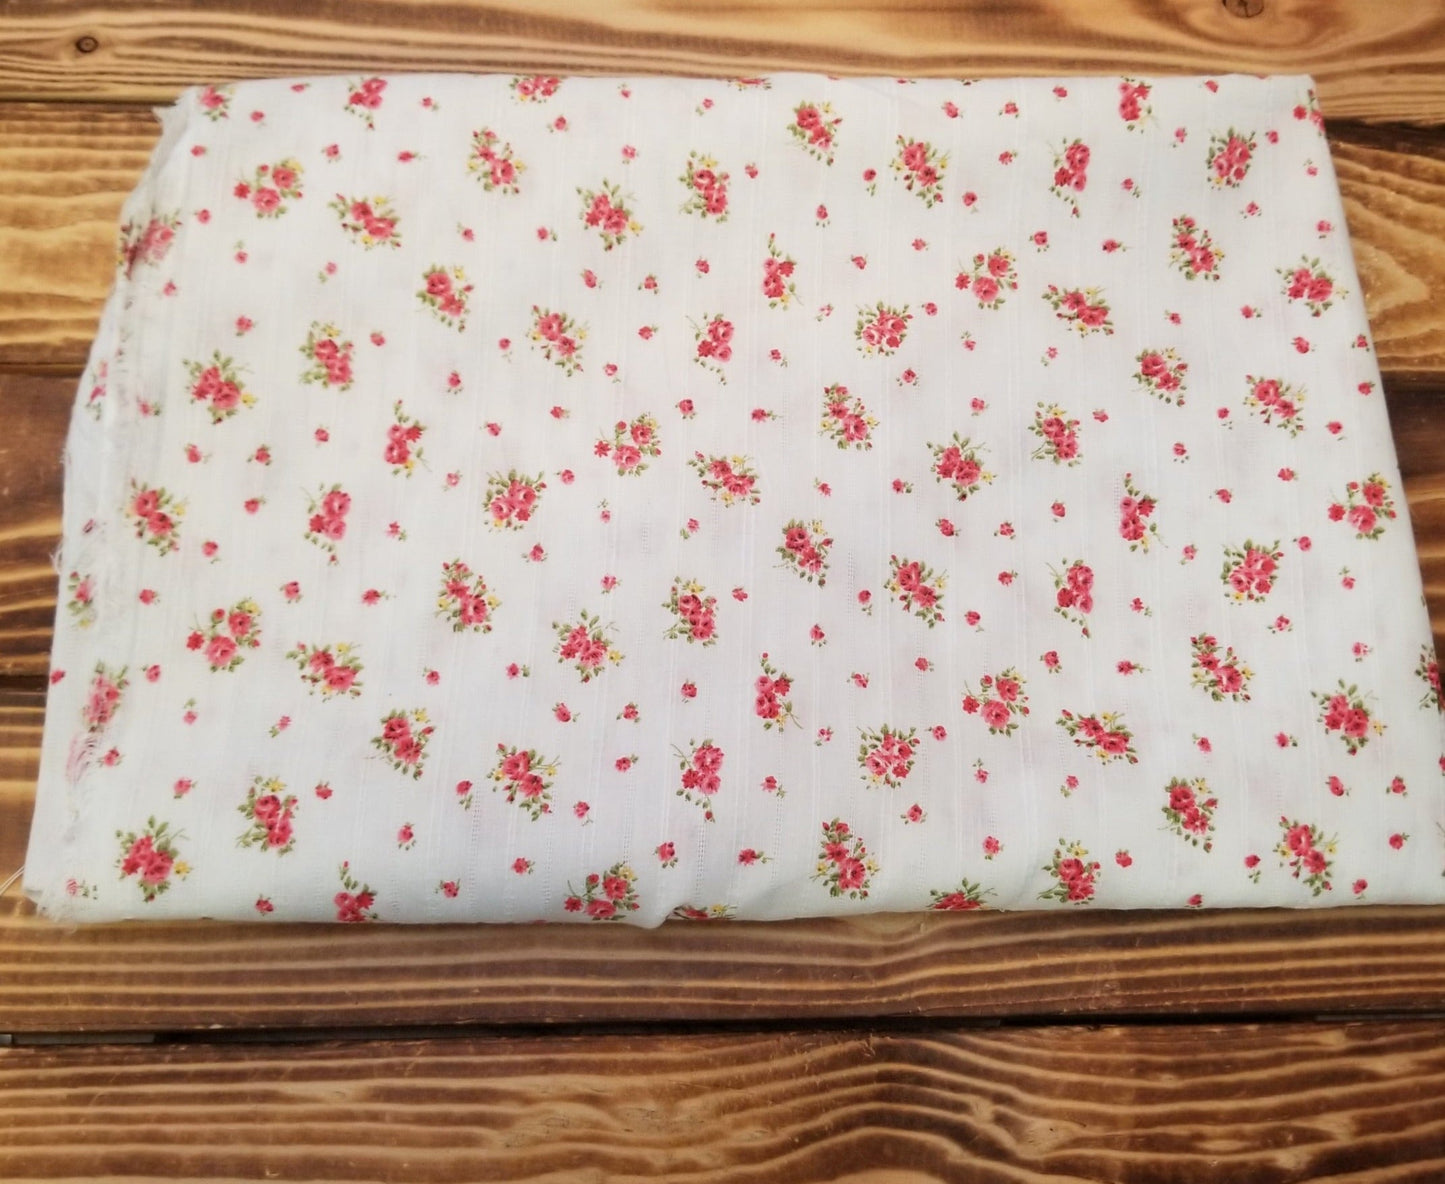 Designer Deadstock Vintage Cottage Roses White and Coral 100% Cotton Textured 3oz Lawn- Sold by the yard